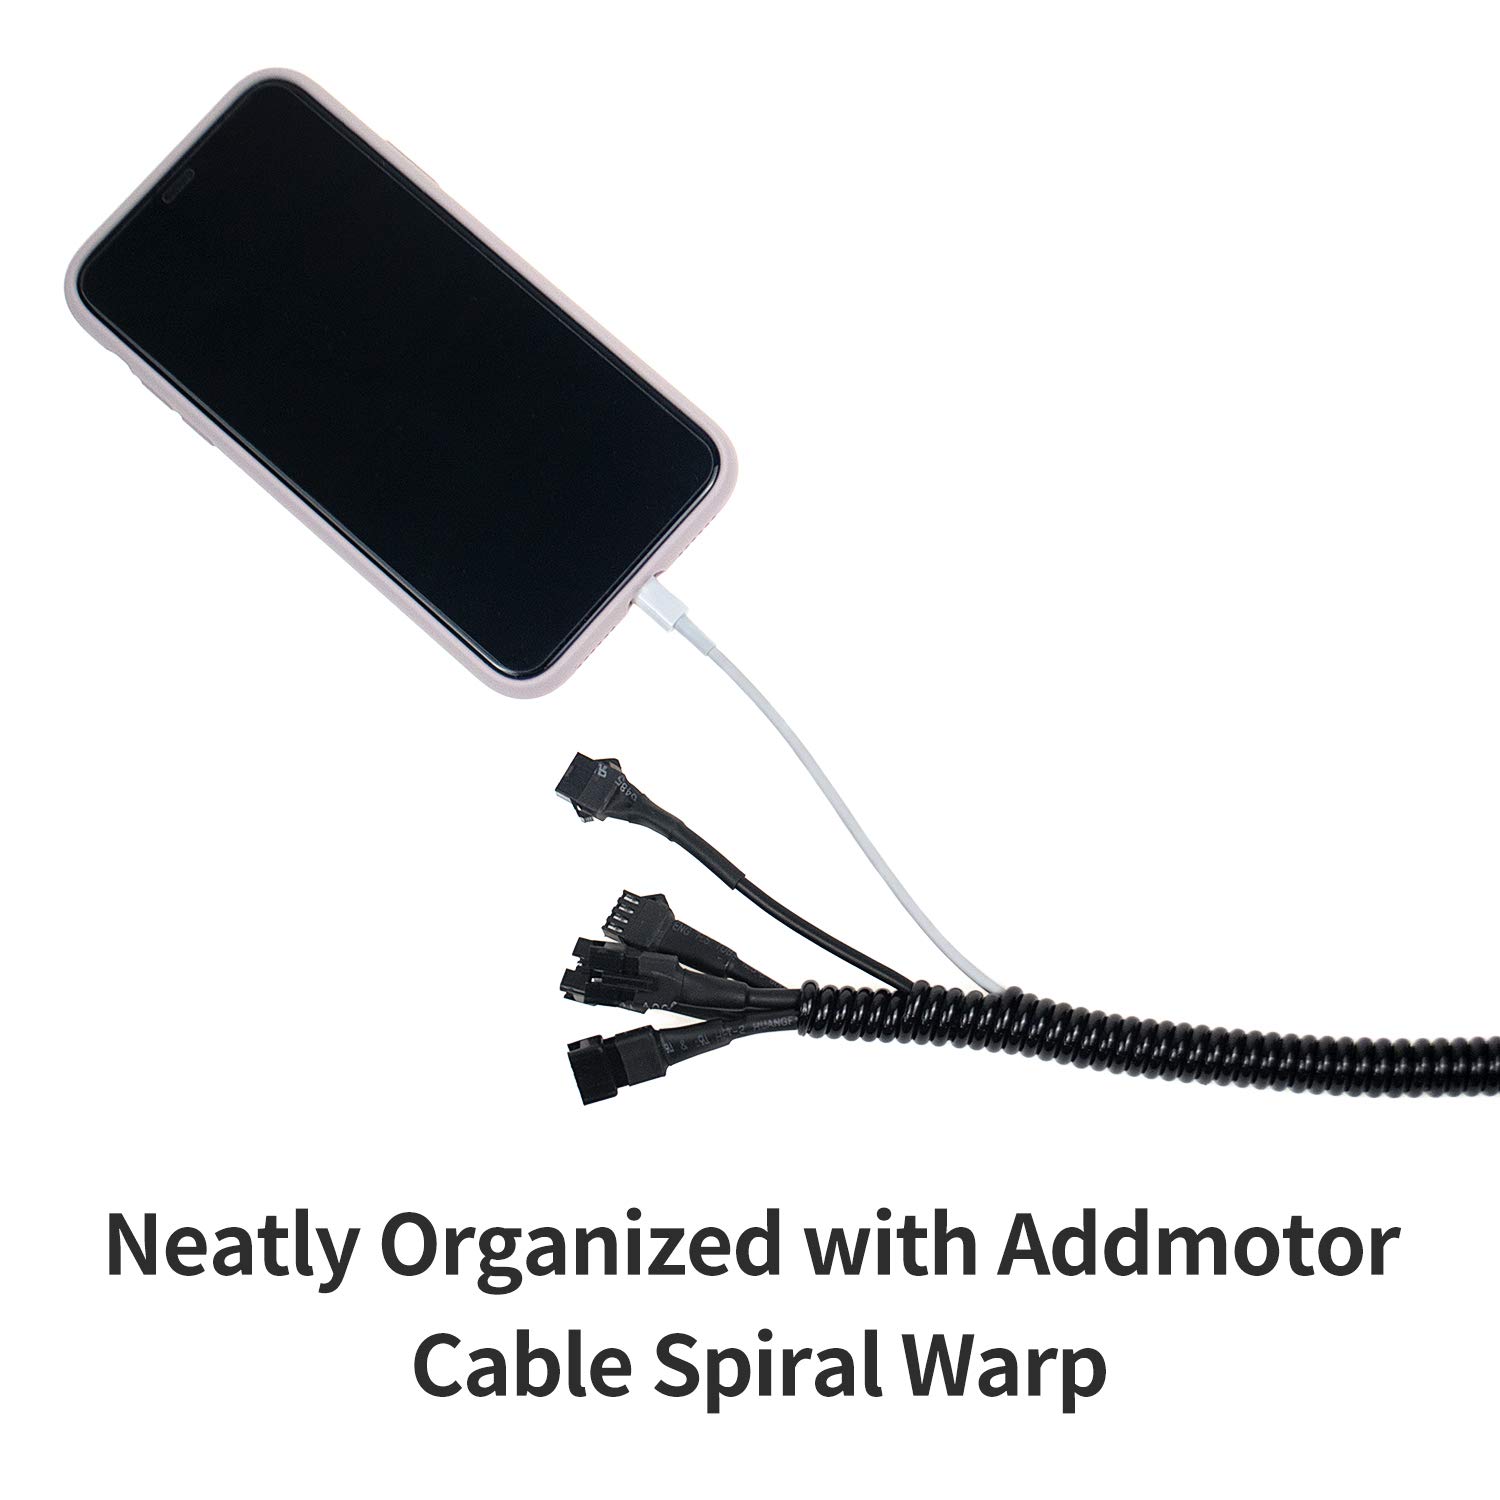 Addmotor Cable Spiral Wrap 1 &2 M Length Cable Management Solution to Organize Cords Black